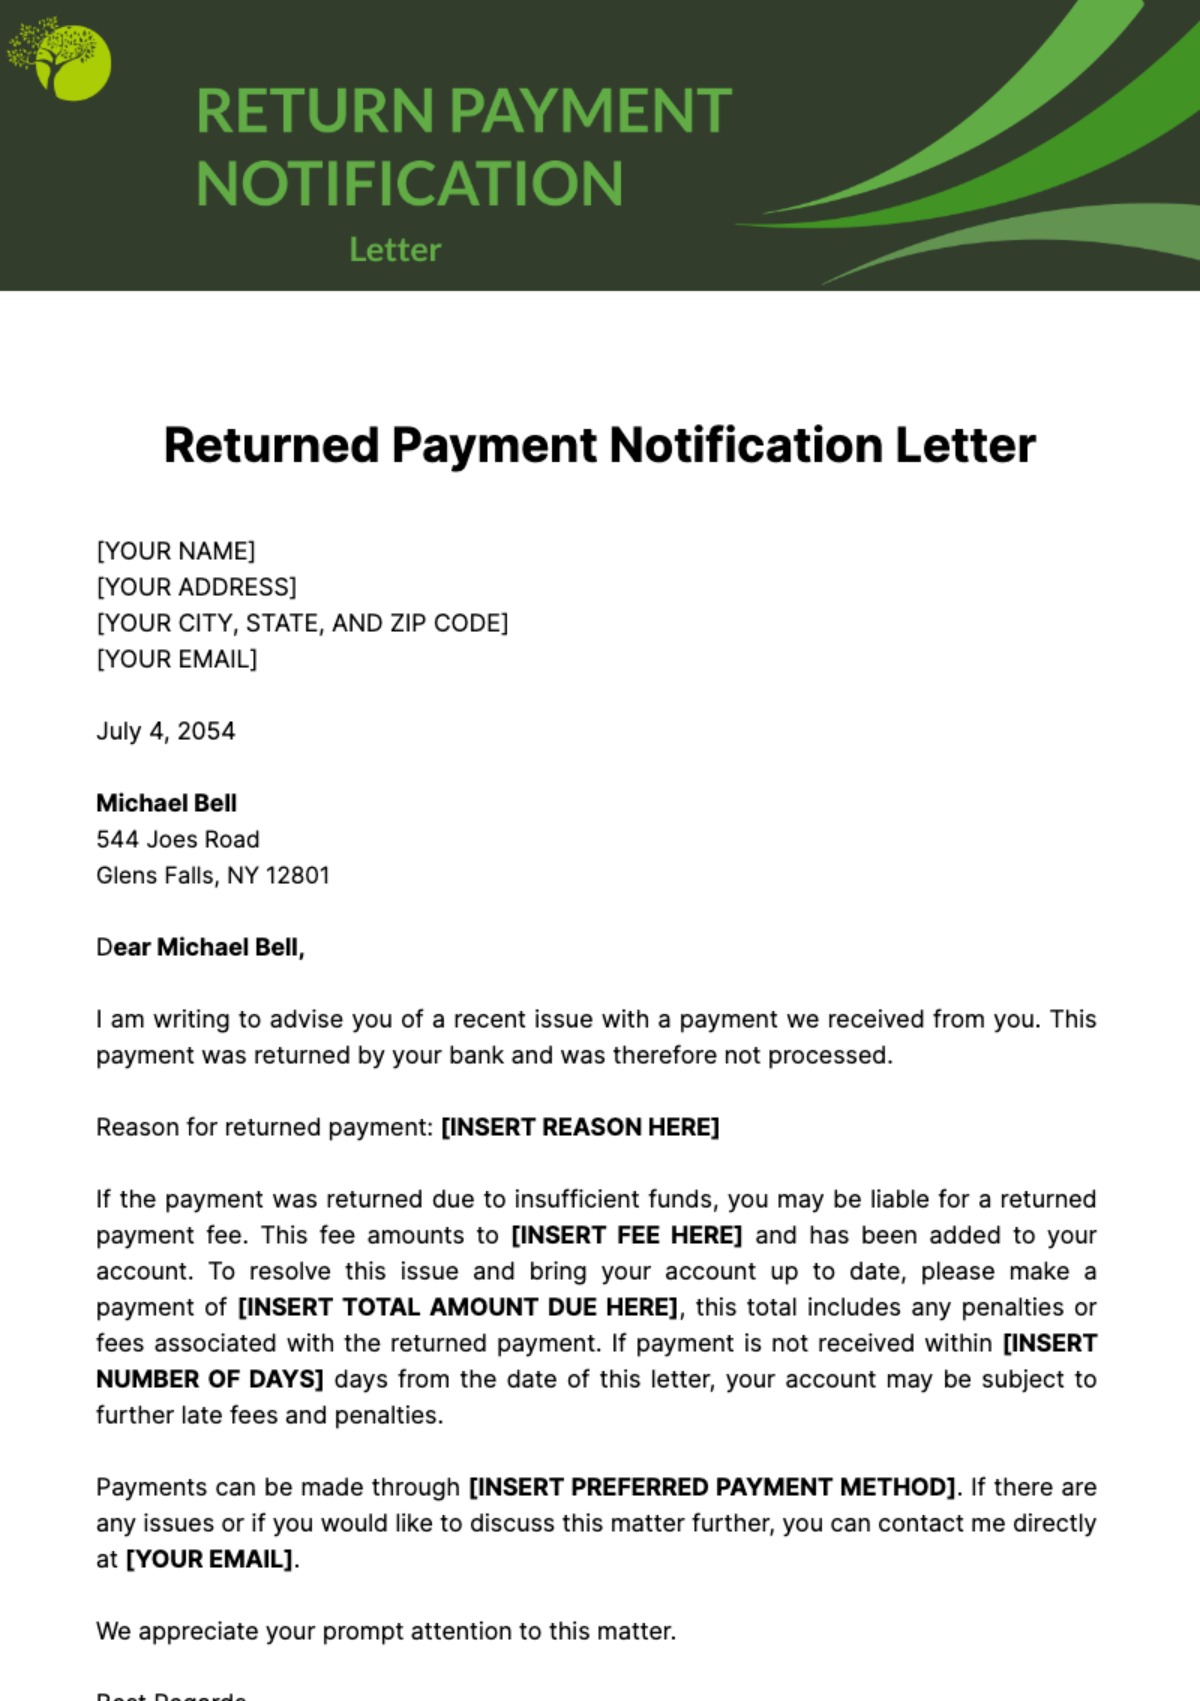 Returned Payment Notification Letter Template